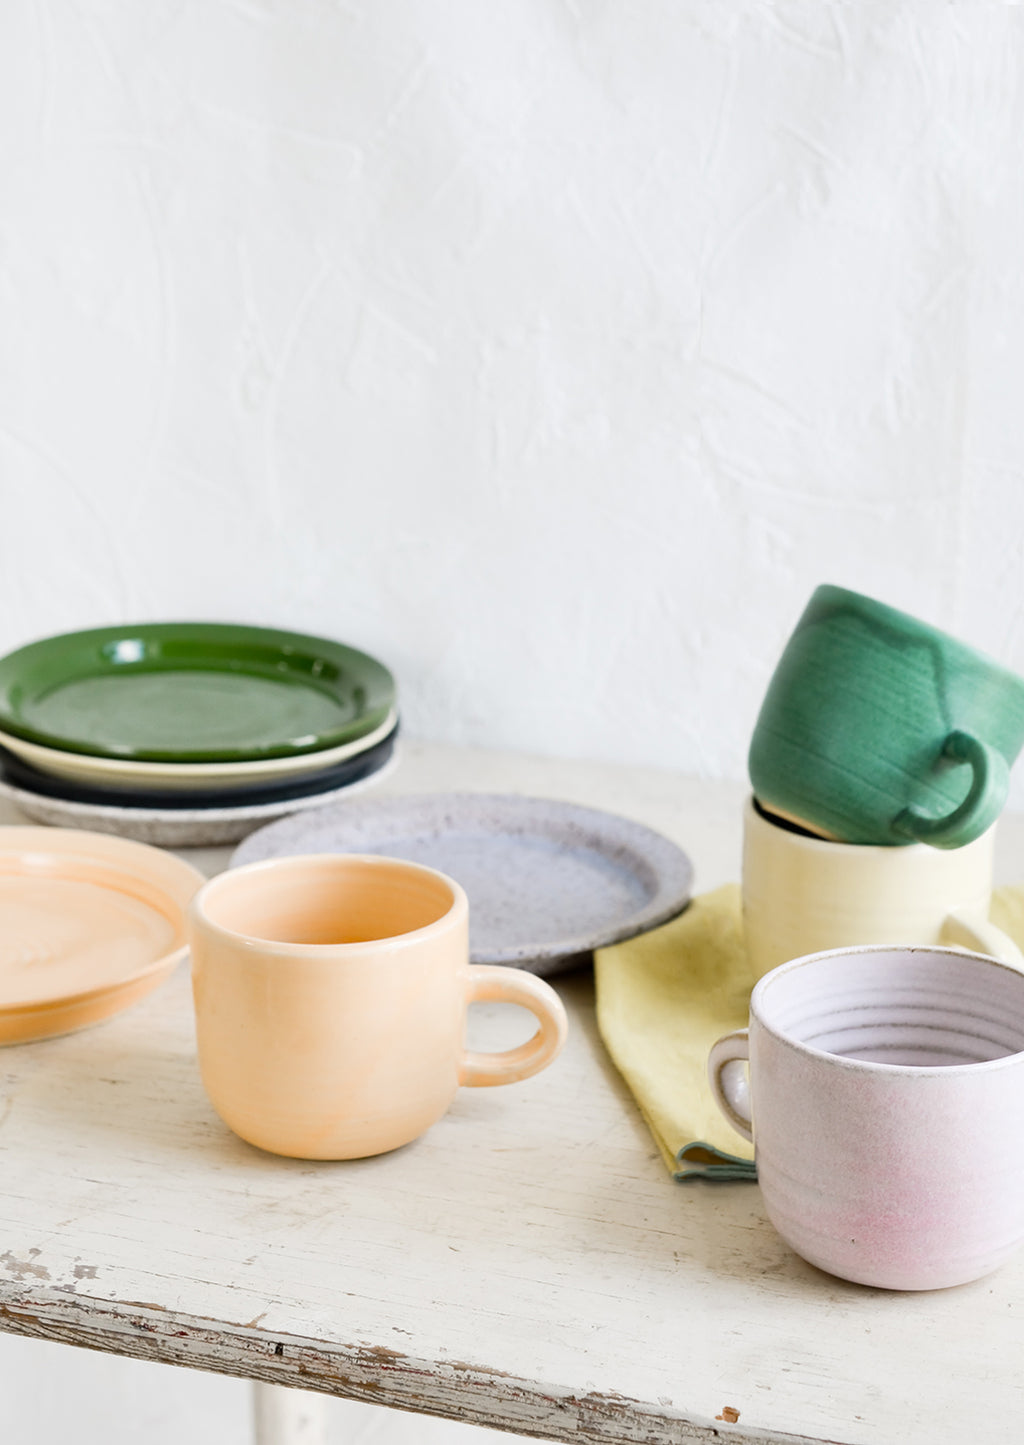 10: A mix of hand glazed plates and mugs.